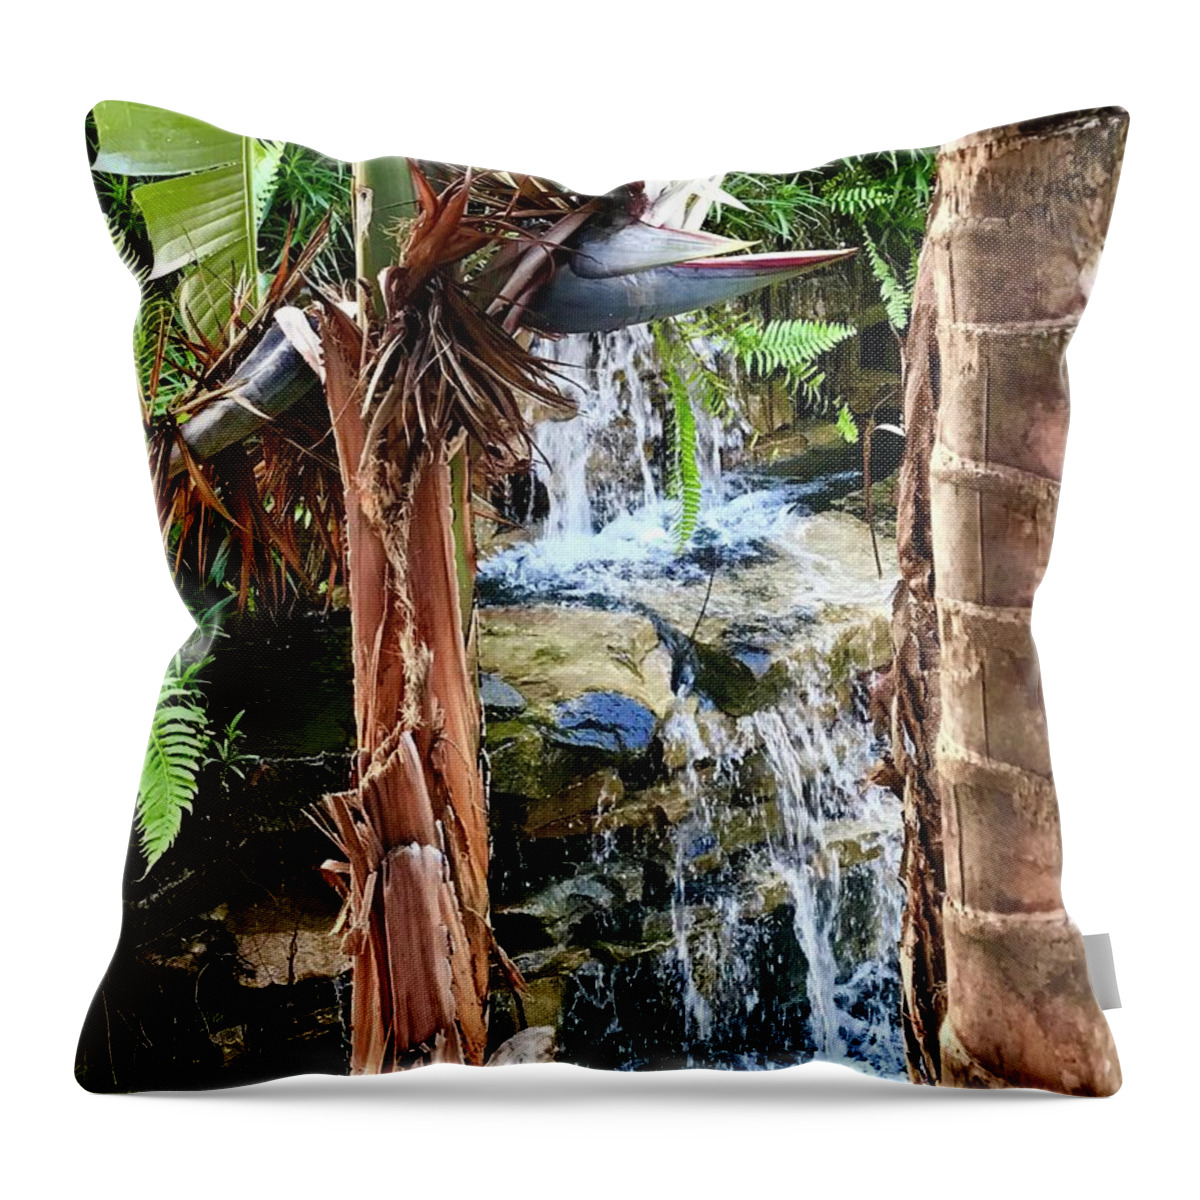 Landscape; Waterfall; Tropical; Water Is Life; Water; Spiritual; Meditation; Nature; Jungle; Earth; Plants; Trees; Mother Nature; Stream; River; Native American; Kicking Bear Barry; Protecting Wild Things; Life On Earth Throw Pillow featuring the photograph The Choice for Life by Kicking Bear Productions